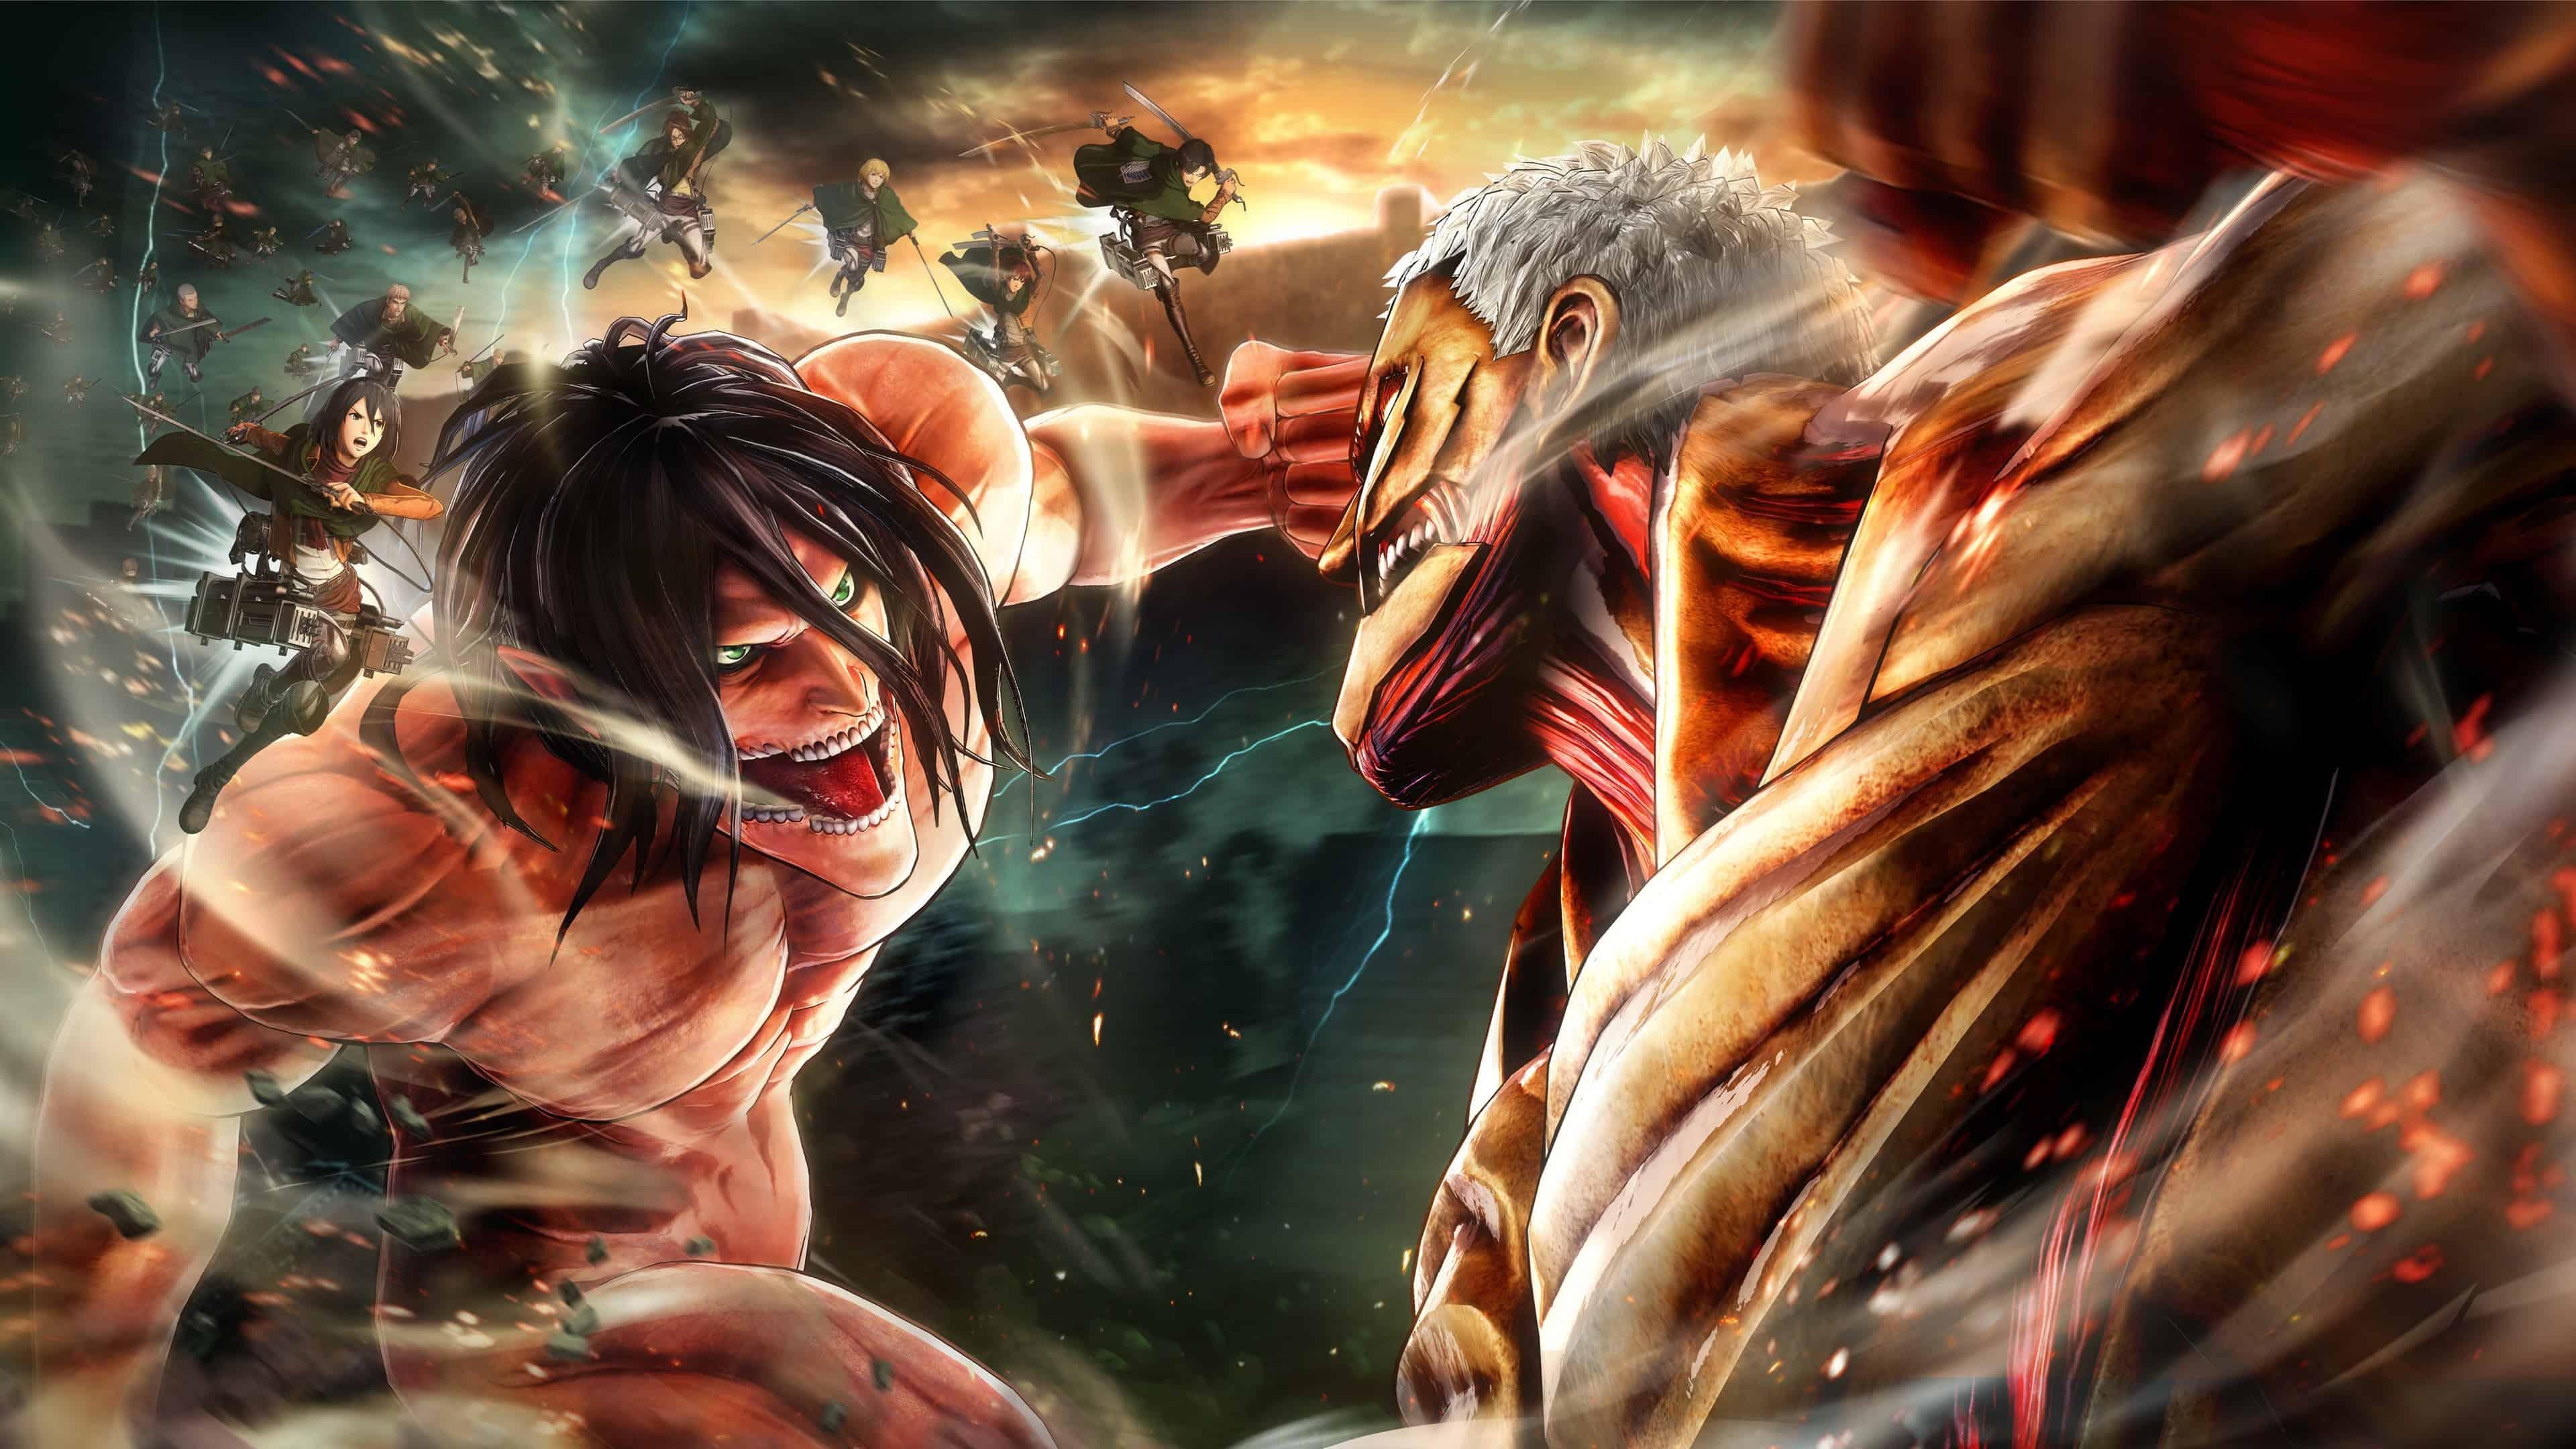 3840 x 2160 · jpeg - Attack On Titan Anime 4k PC Wallpapers - Wallpaper Cave